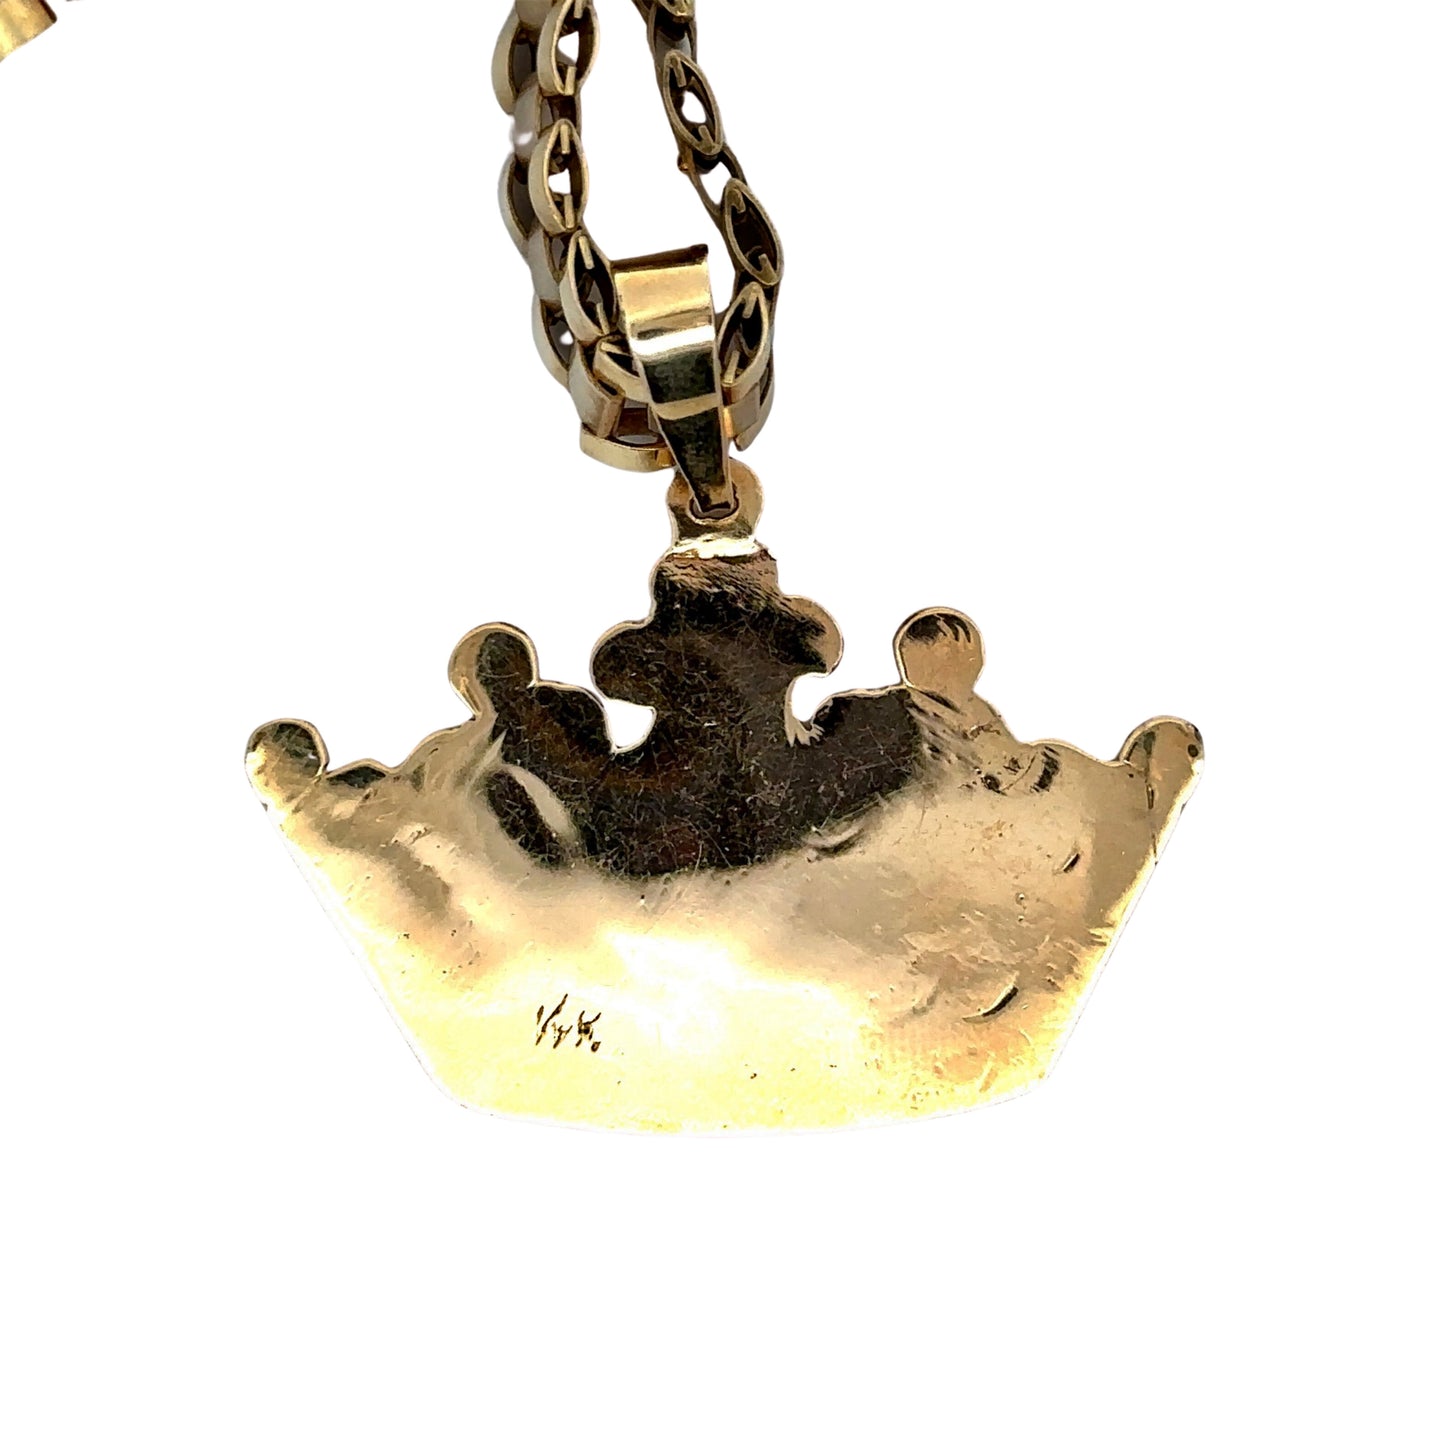 back of queen's crown pendant with 14K stamp and scratches